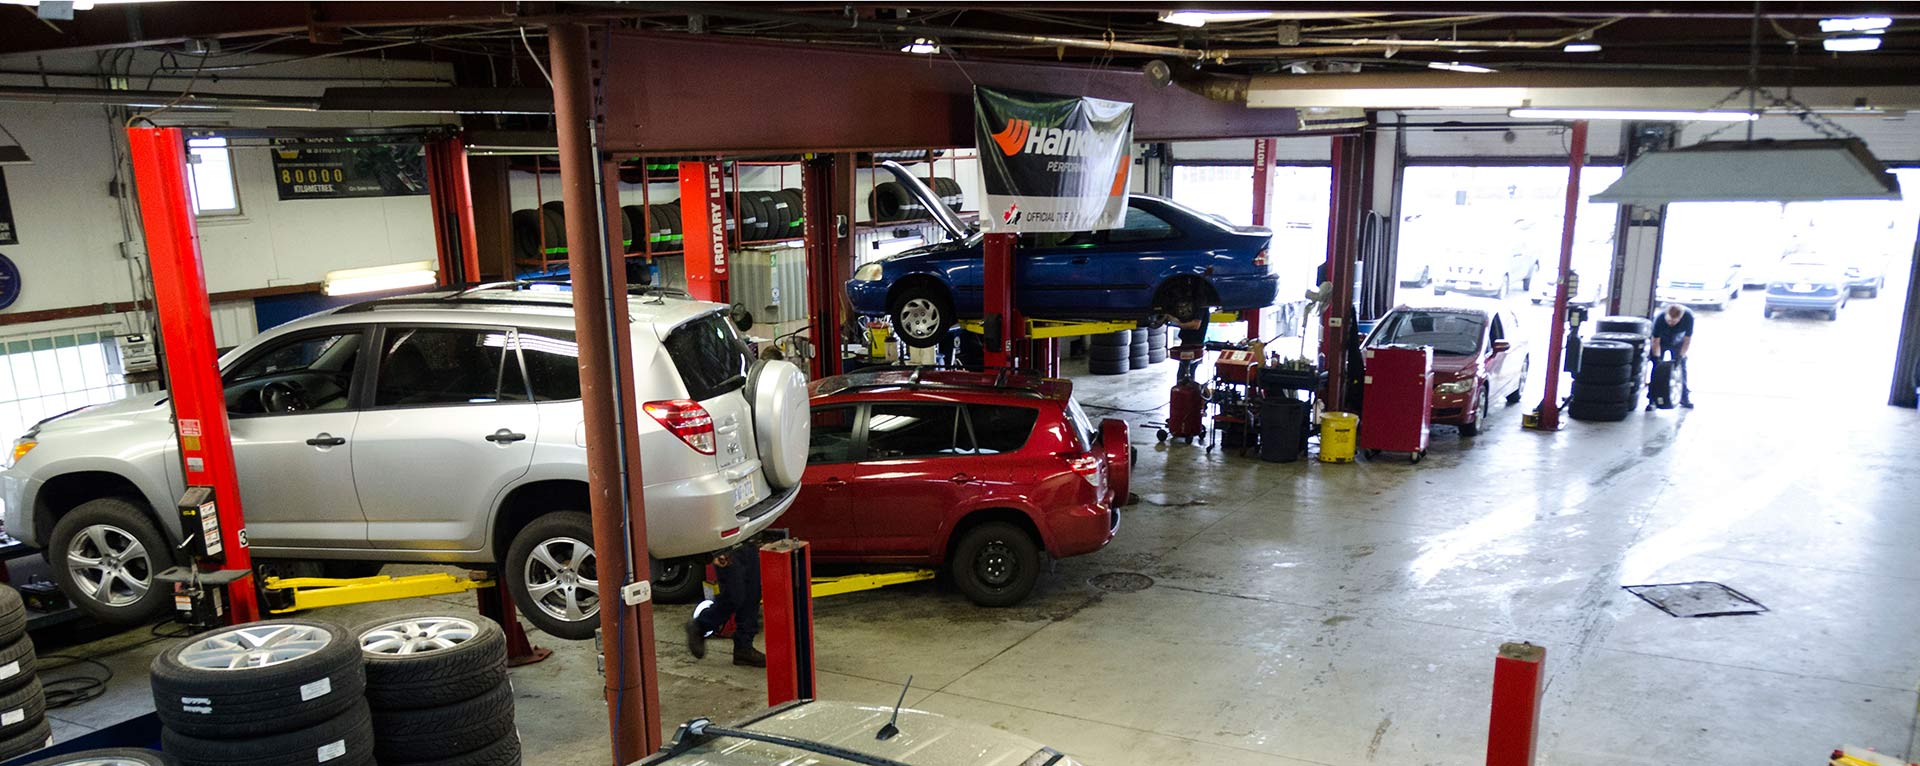 The image shows an active car repair garage with multiple vehicles lifted on hoists, a tire stack on the side, and at least one person working.